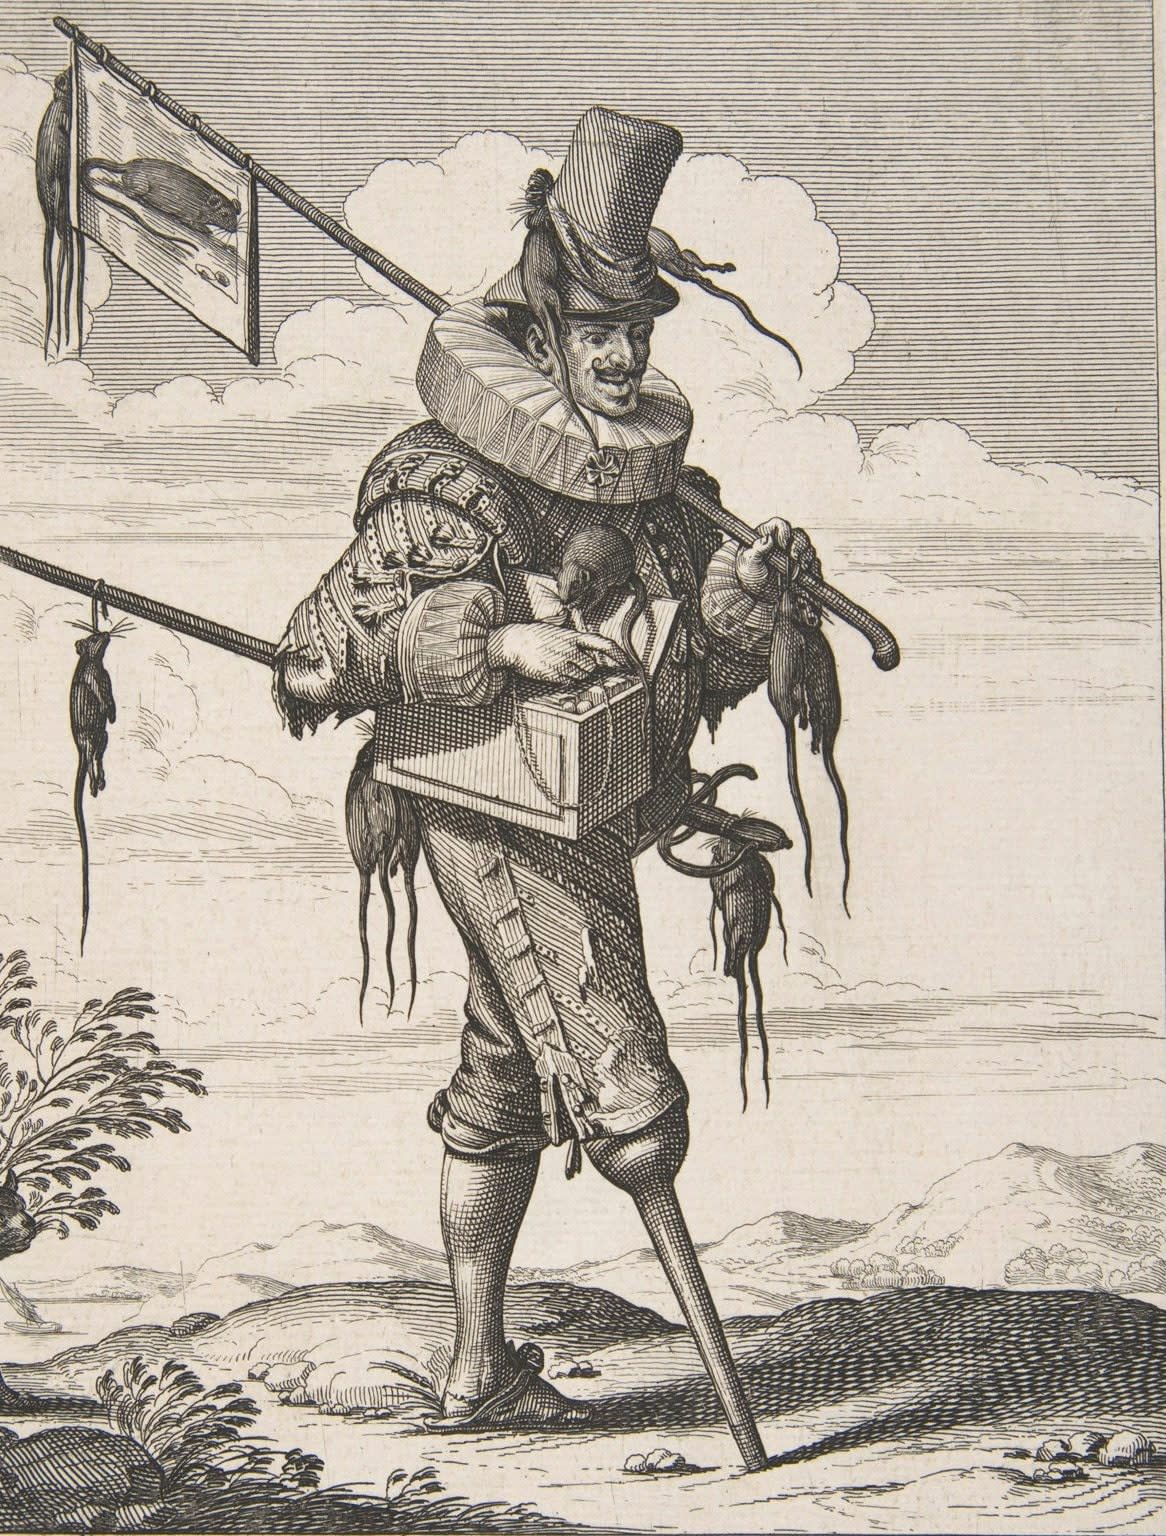 An etching of a rat catcher in Paris, mid to late 17th century